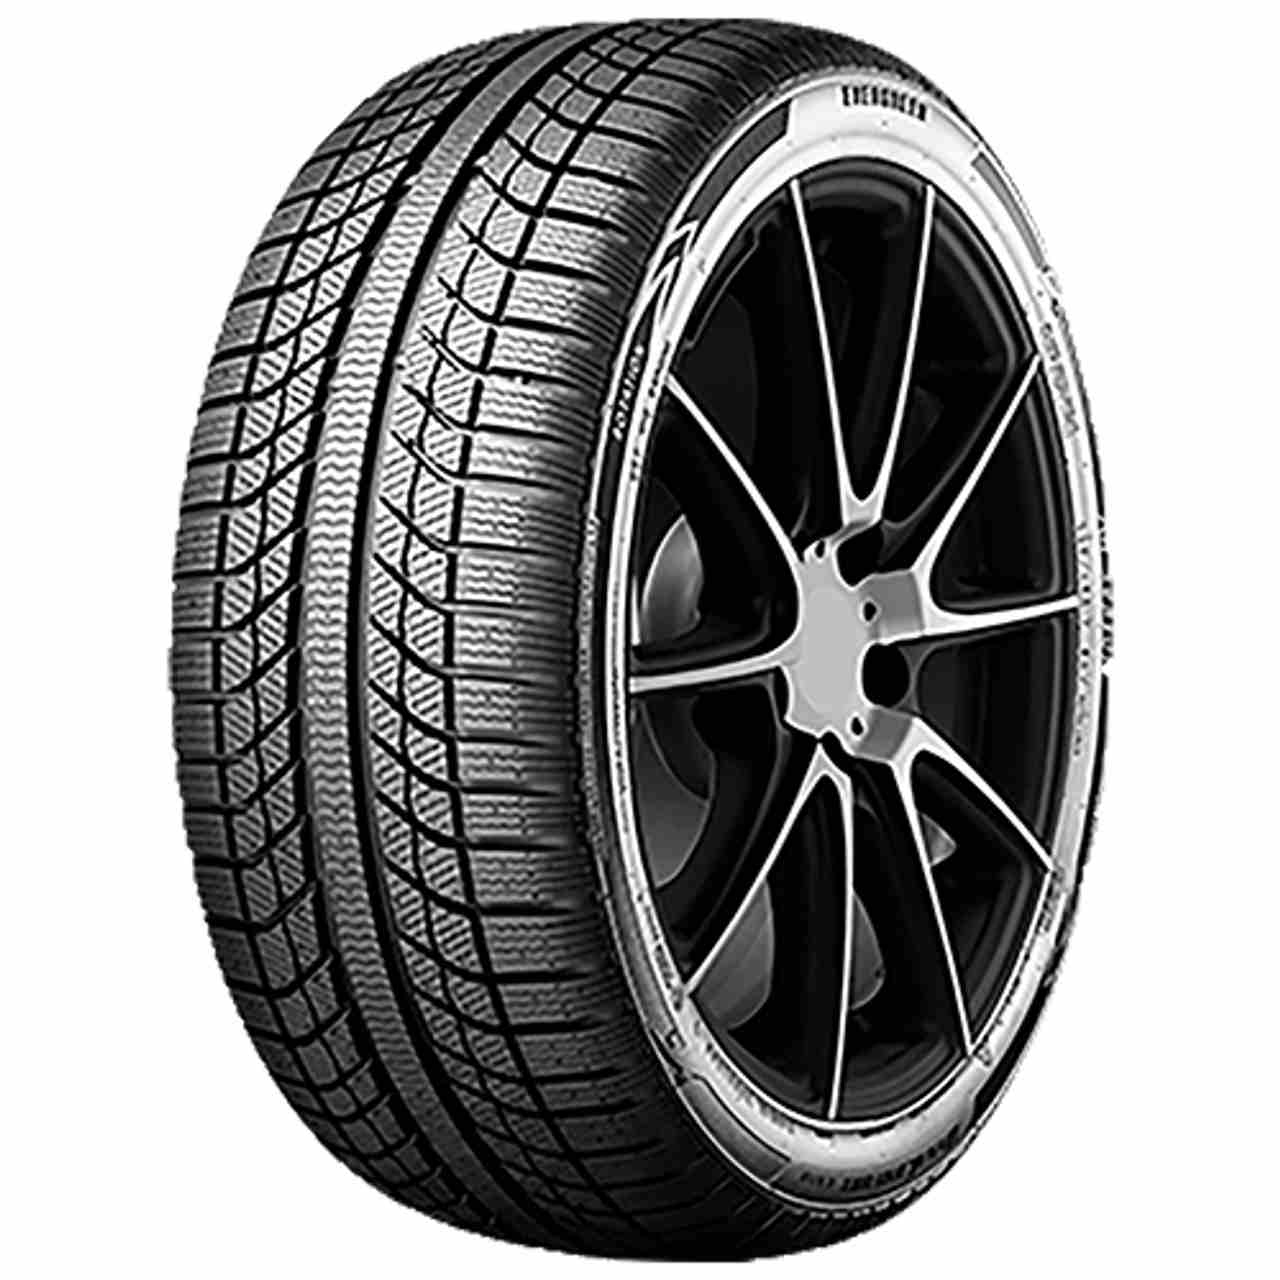 EVERGREEN DYNACOMFORT EA719 155/65R14 75T BSW